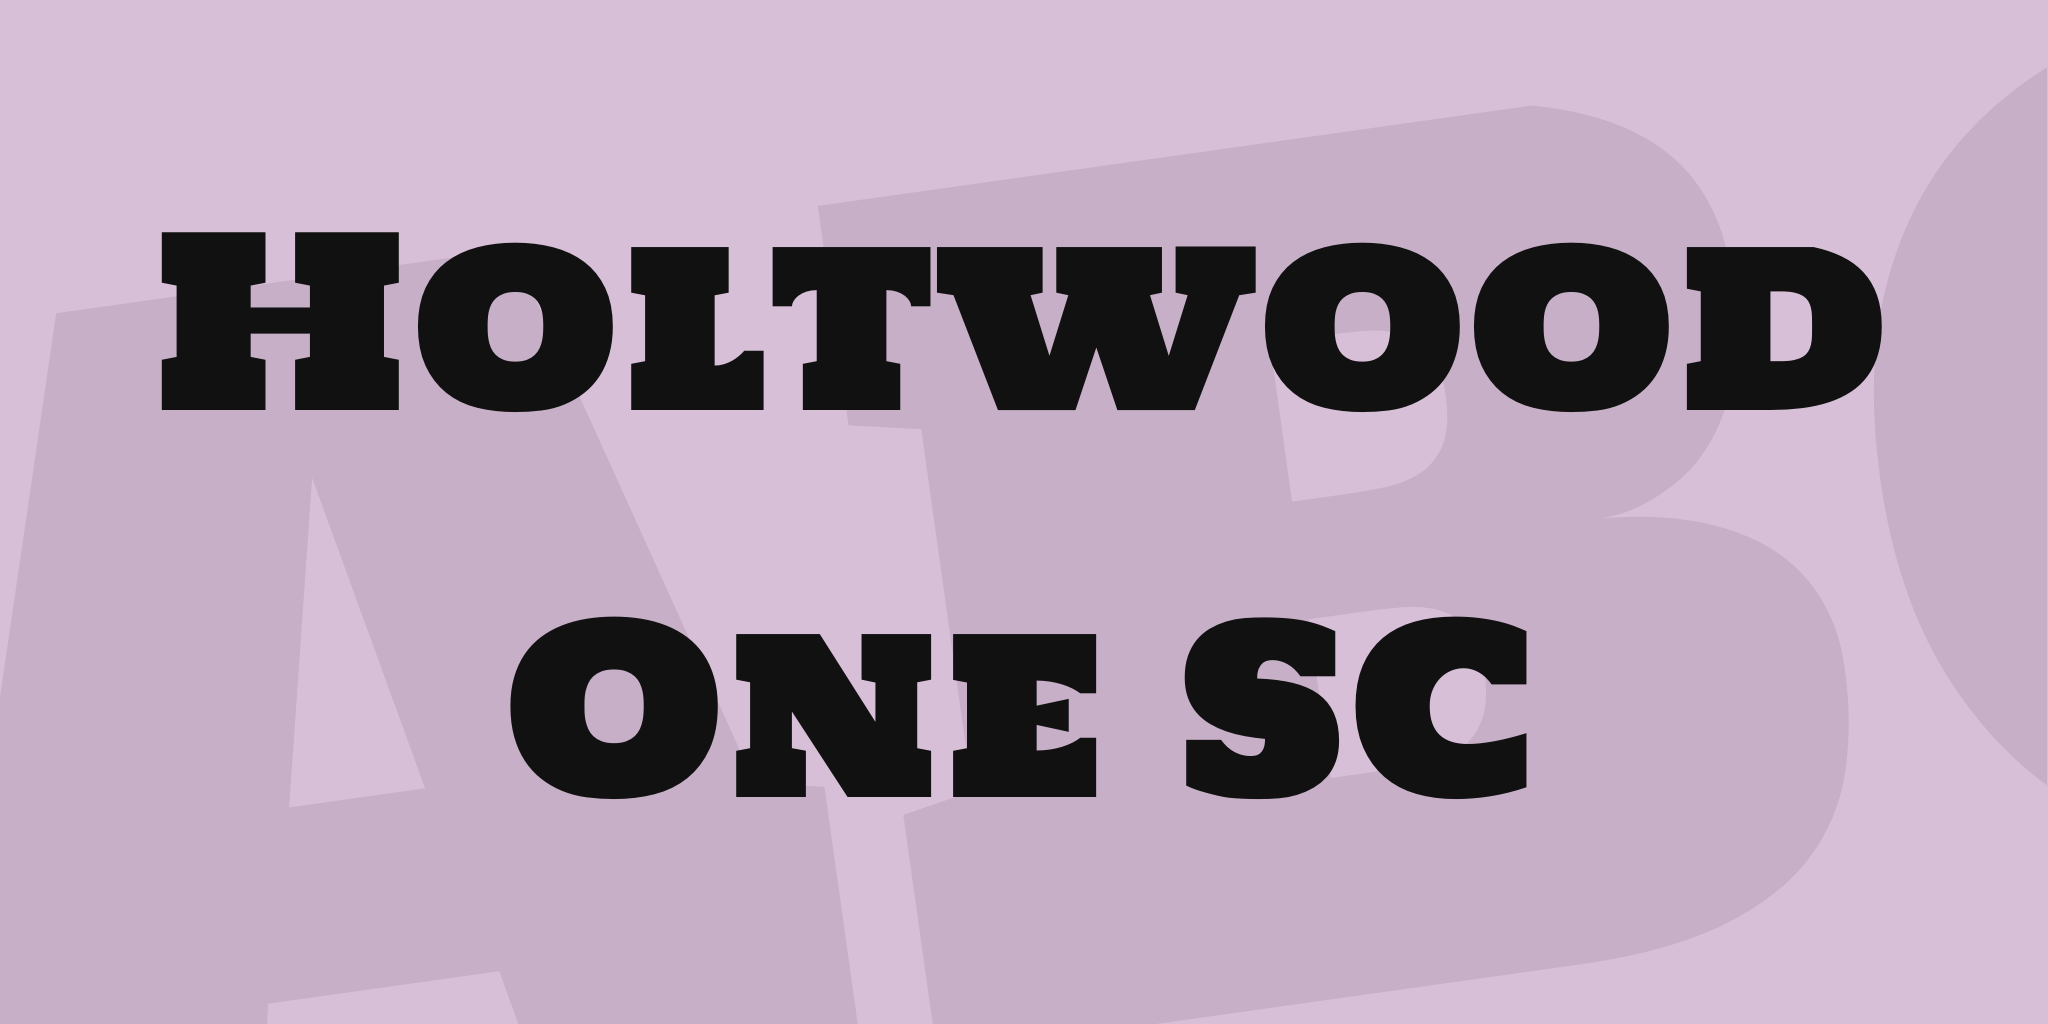 Holtwood One Semi Condensed